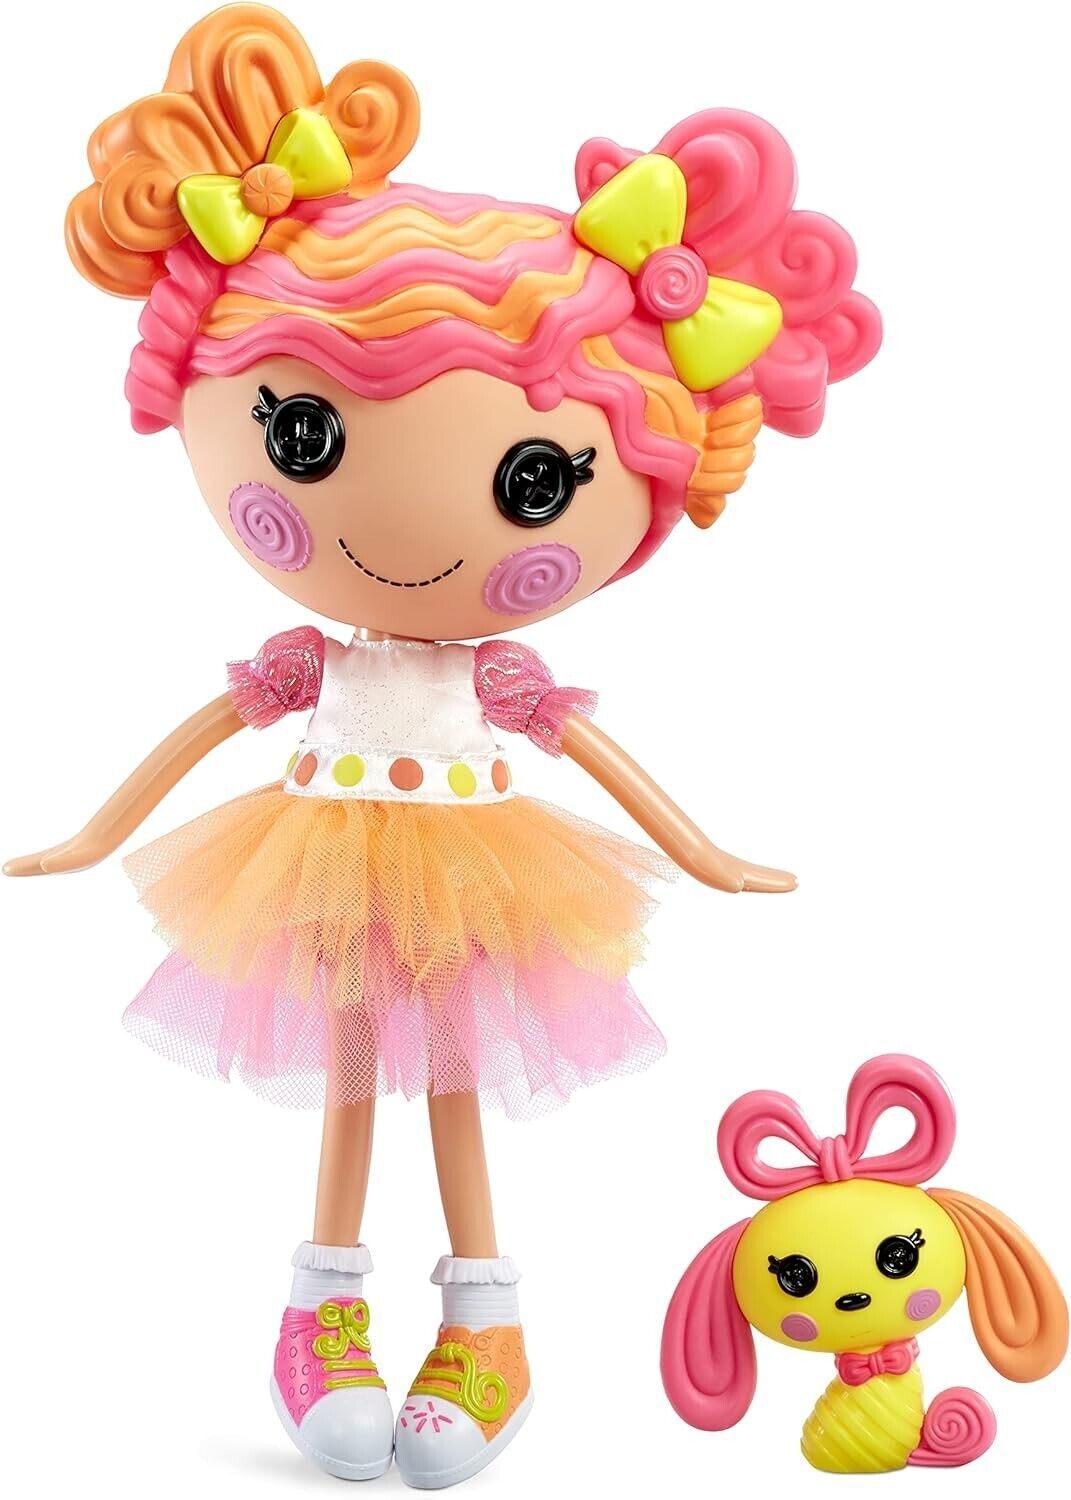 Primary image for Lalaloopsy Sew Magical Candy Ribbon & Pet Puppy, 13" Taffy Candy-Inspired Doll